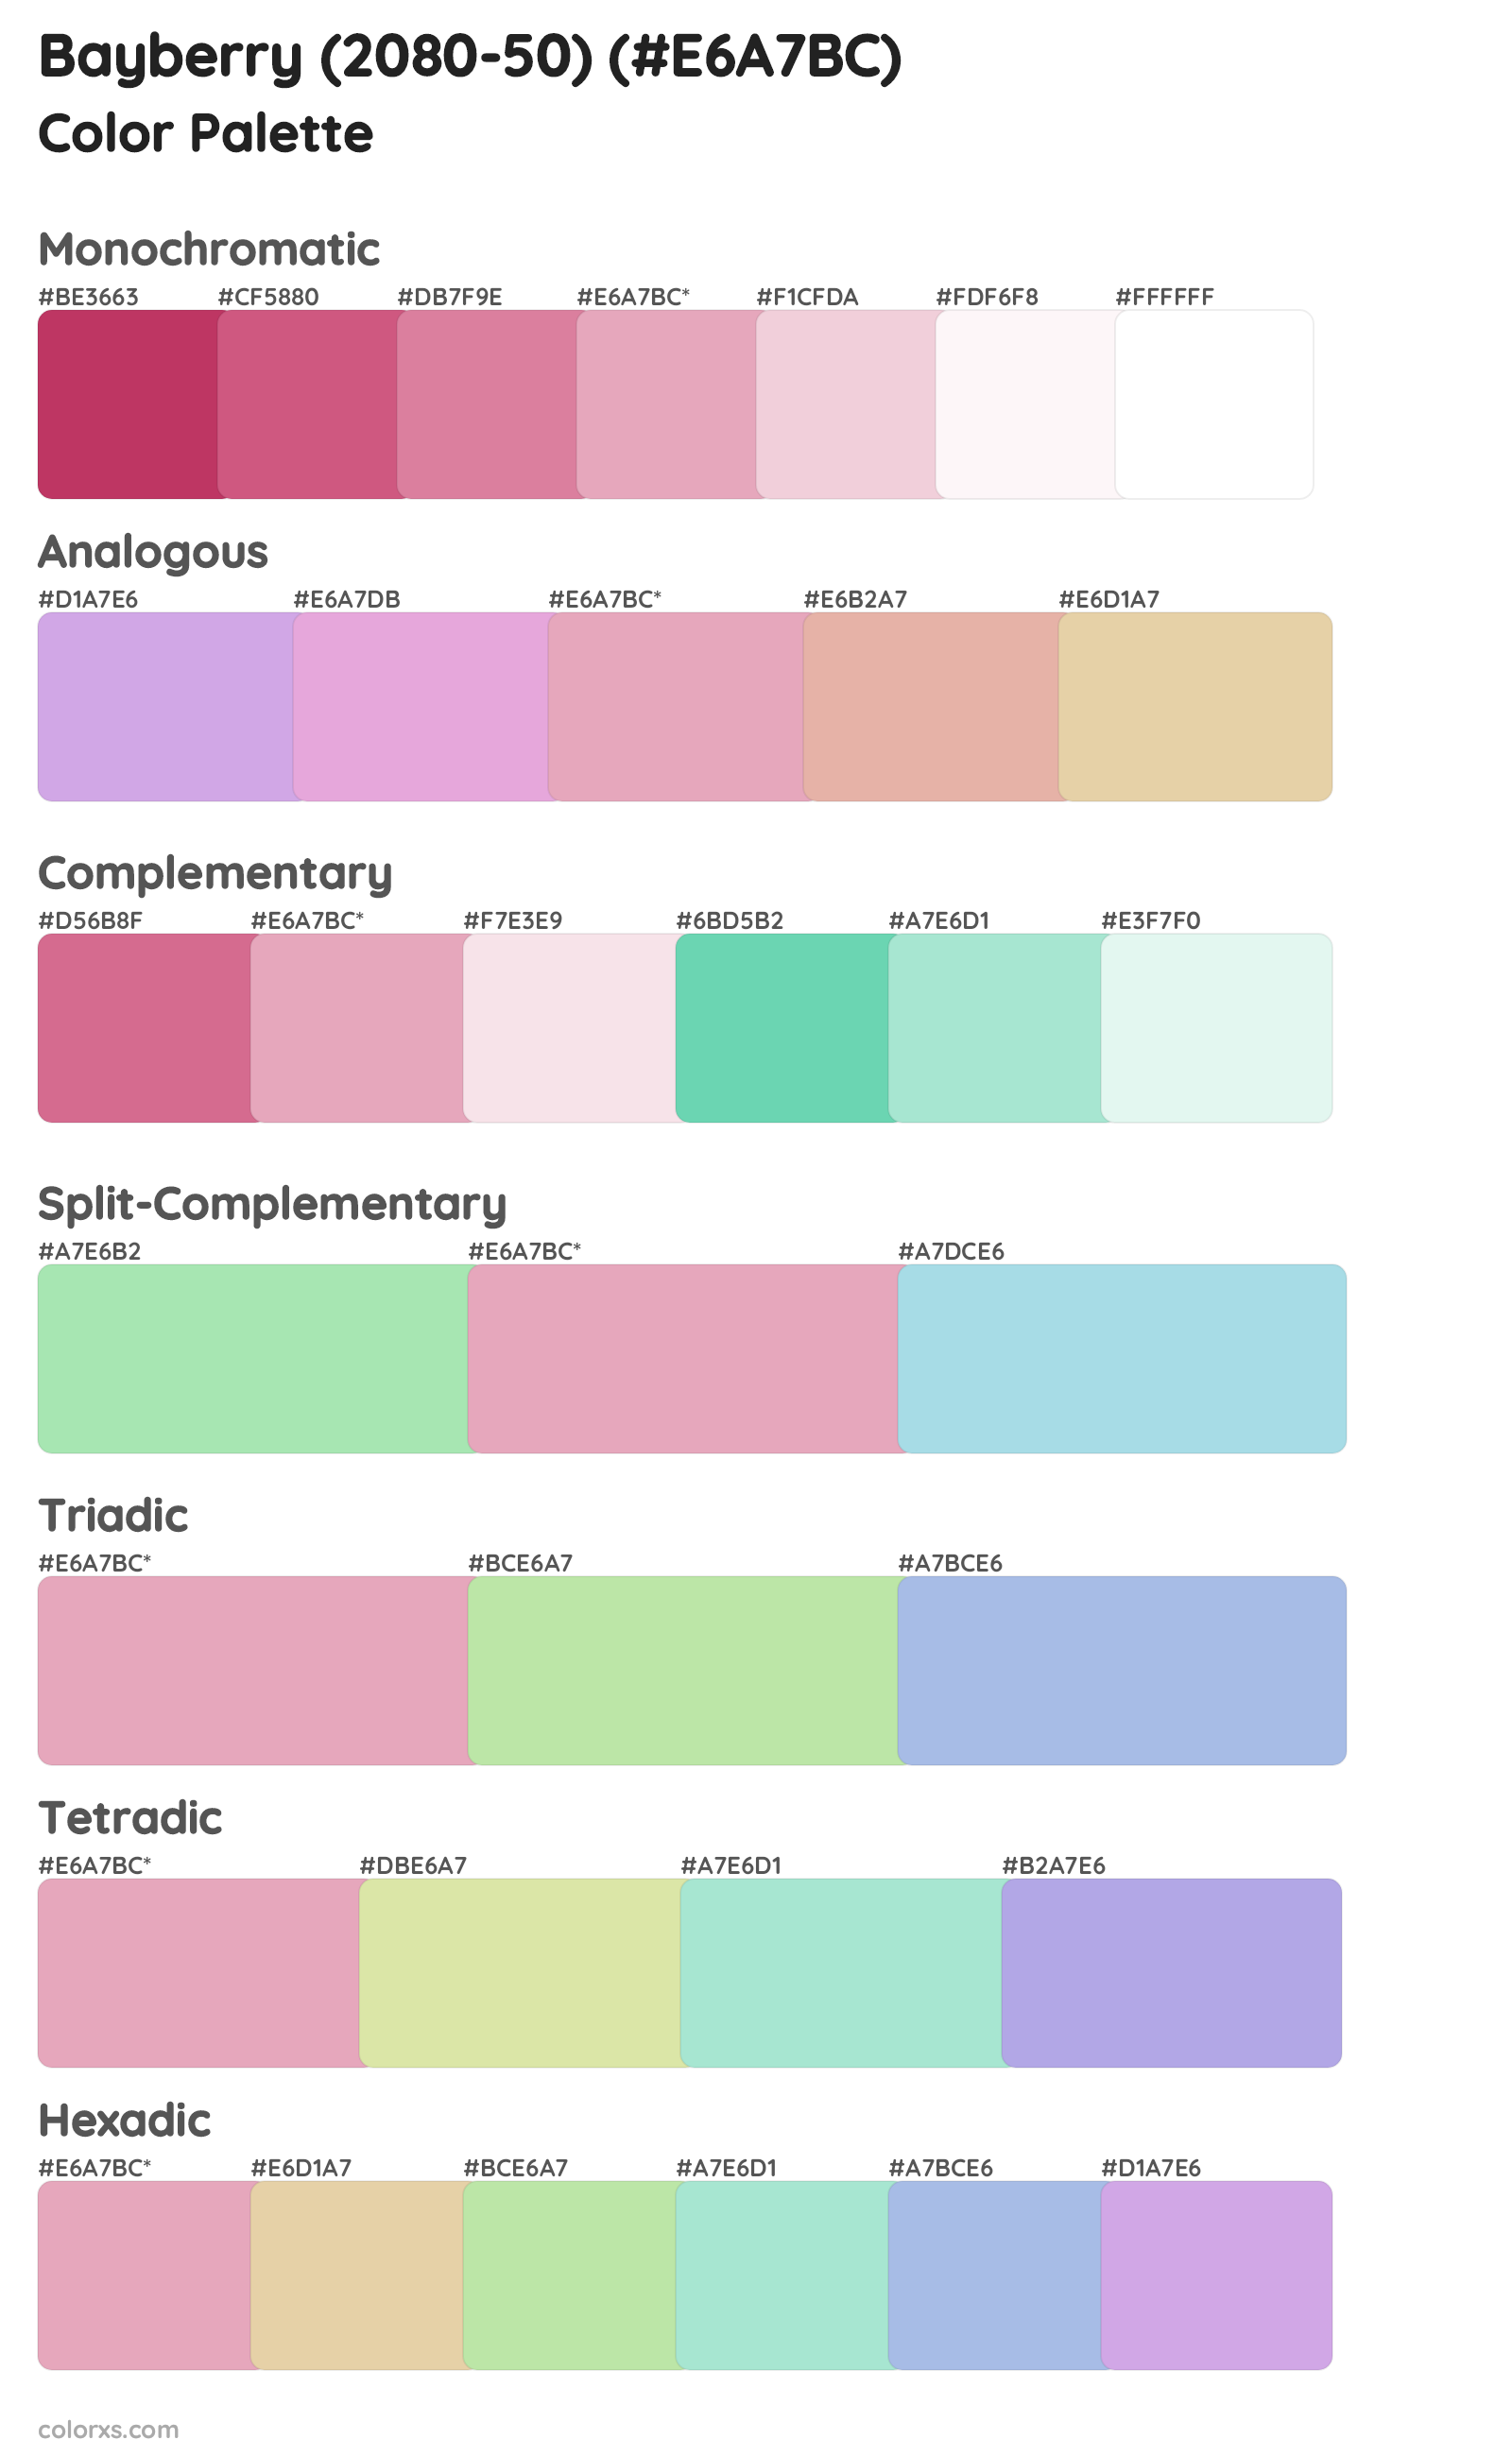 Bayberry (2080-50) Color Scheme Palettes